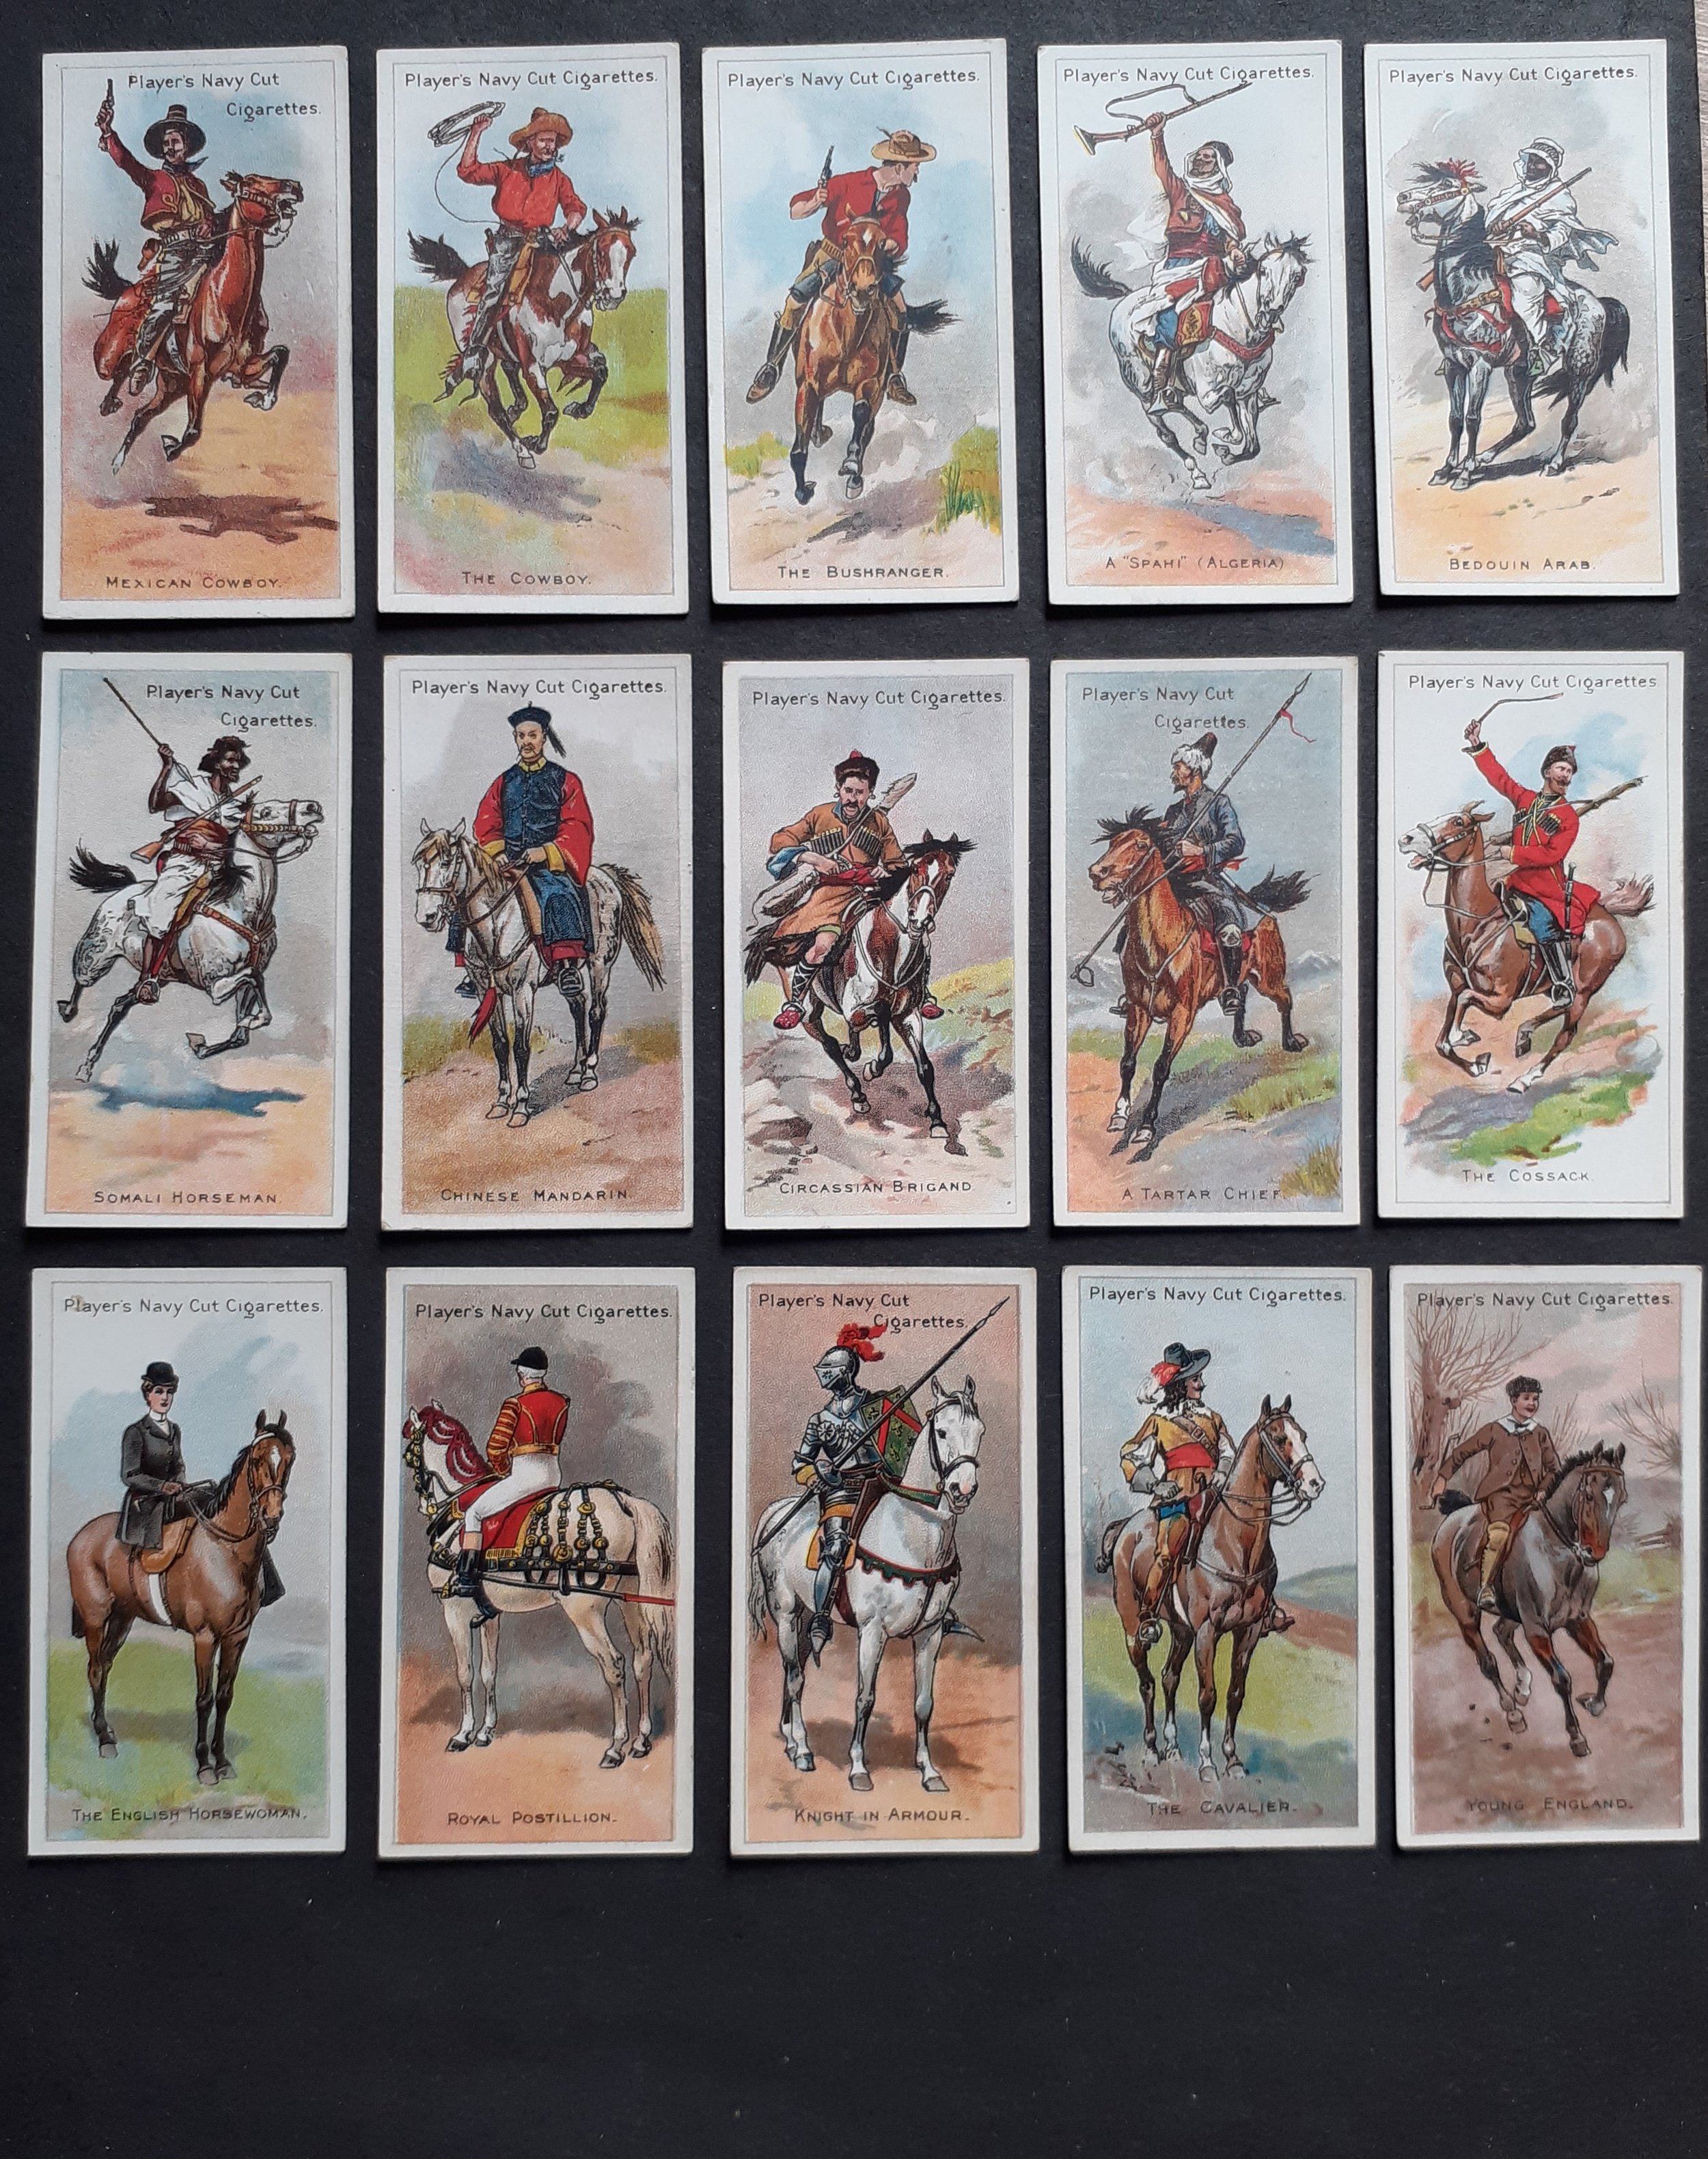 1905 Riders of the World Cigarette Cards.